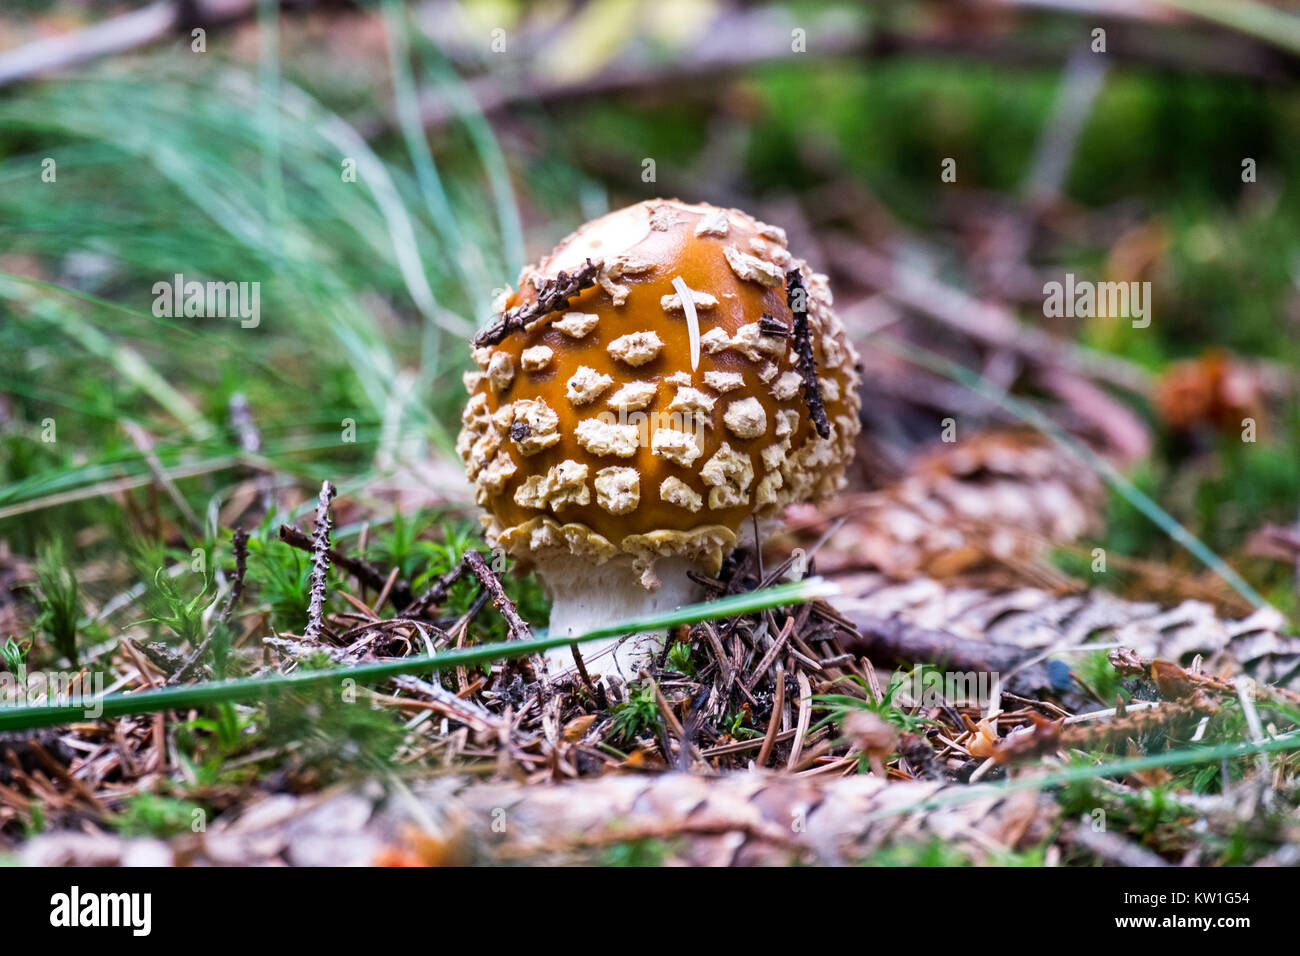 Royal fly agaric makes its way out of the ground (Amanita regalis) Stock Photo